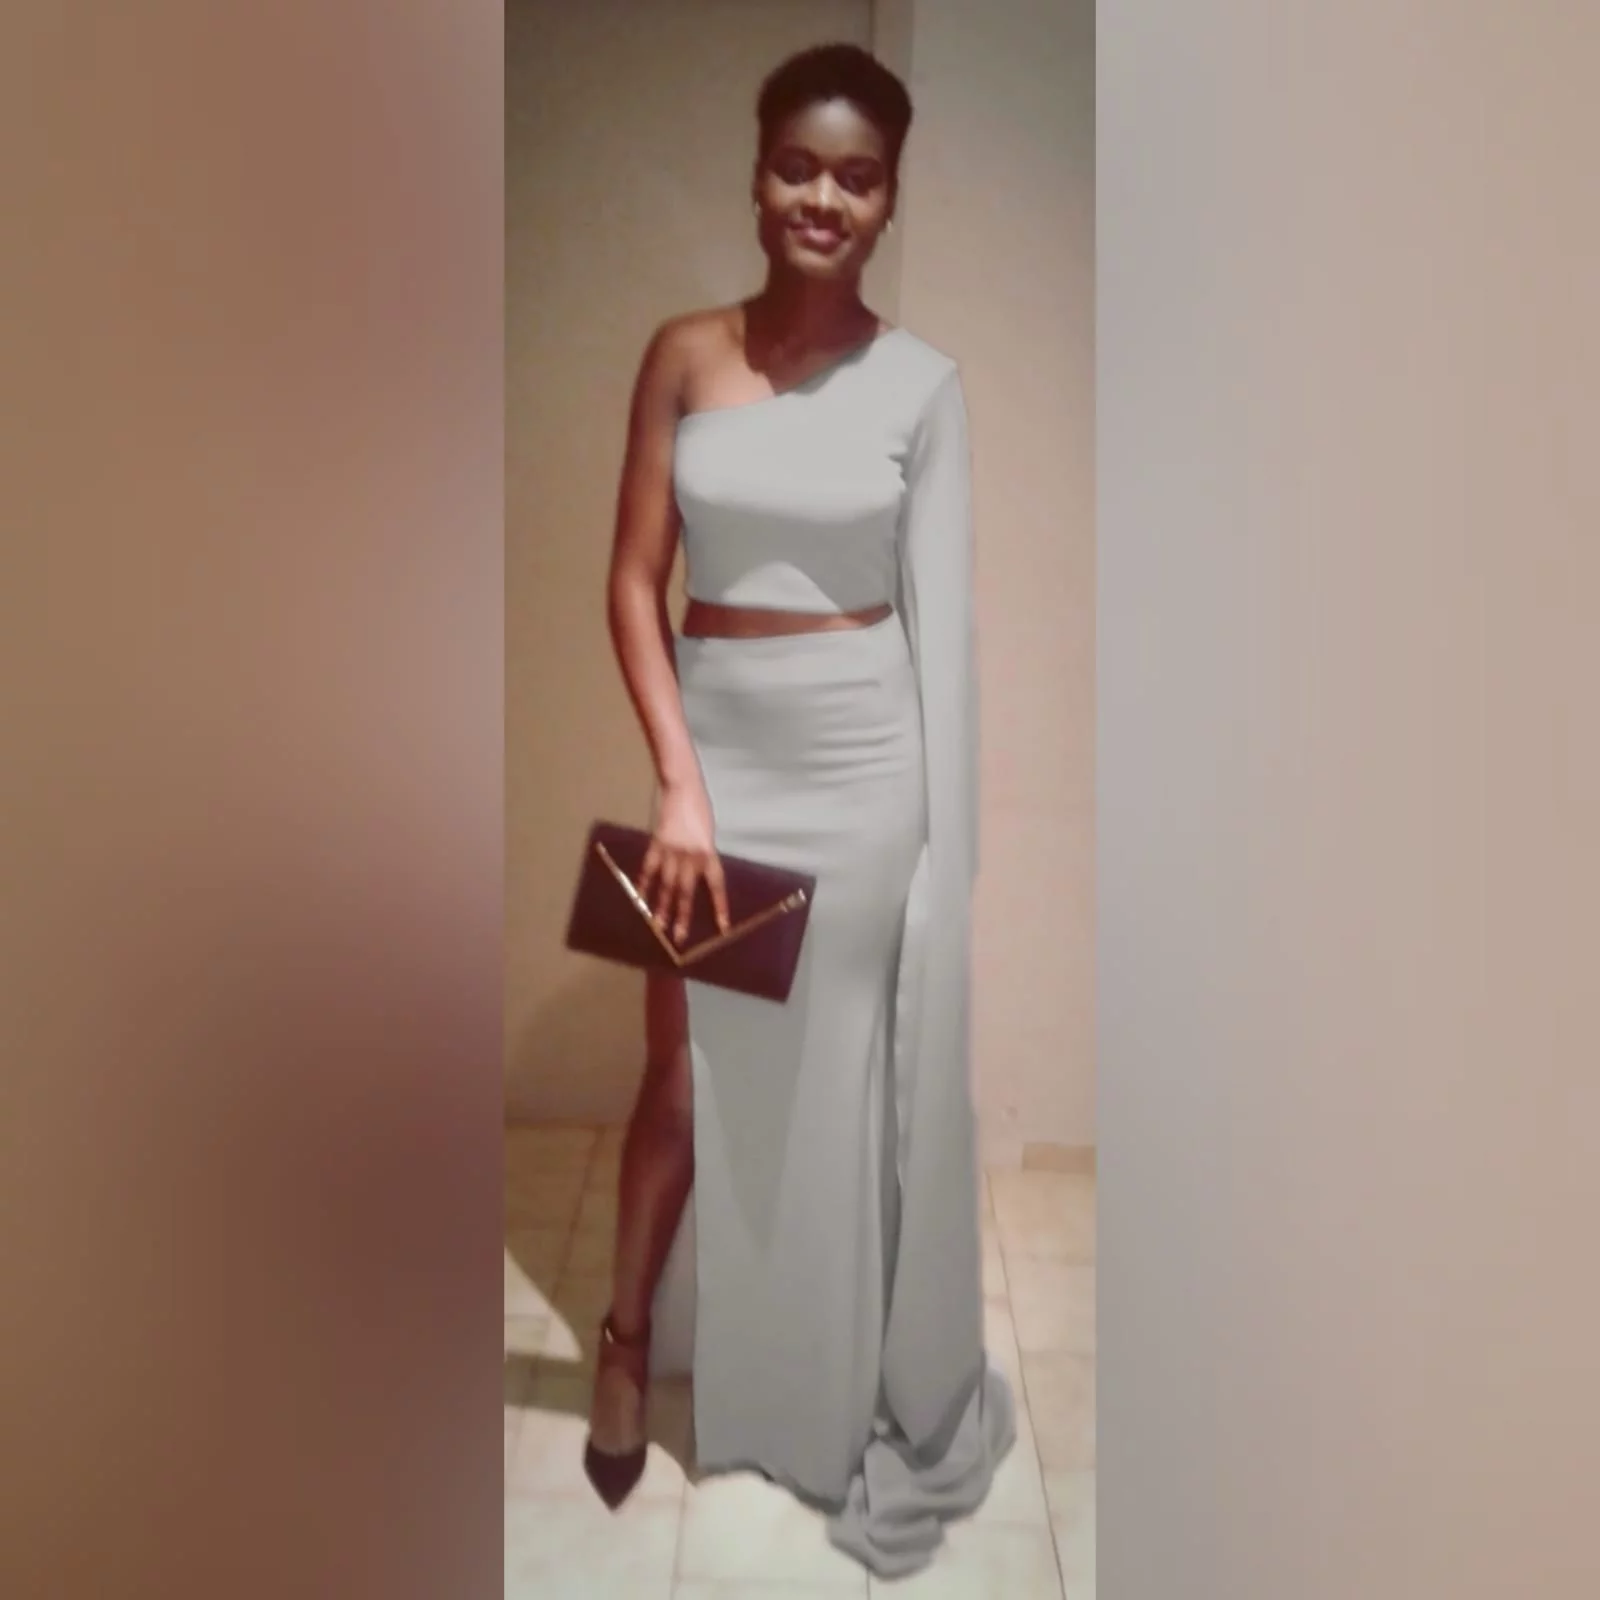 2 piece light grey matric dance dress 6 2 piece light grey matric dance dress, crop top with a single shoulder and a long wide sleeve creating a train. With a fitted long skirt, with a high slit.